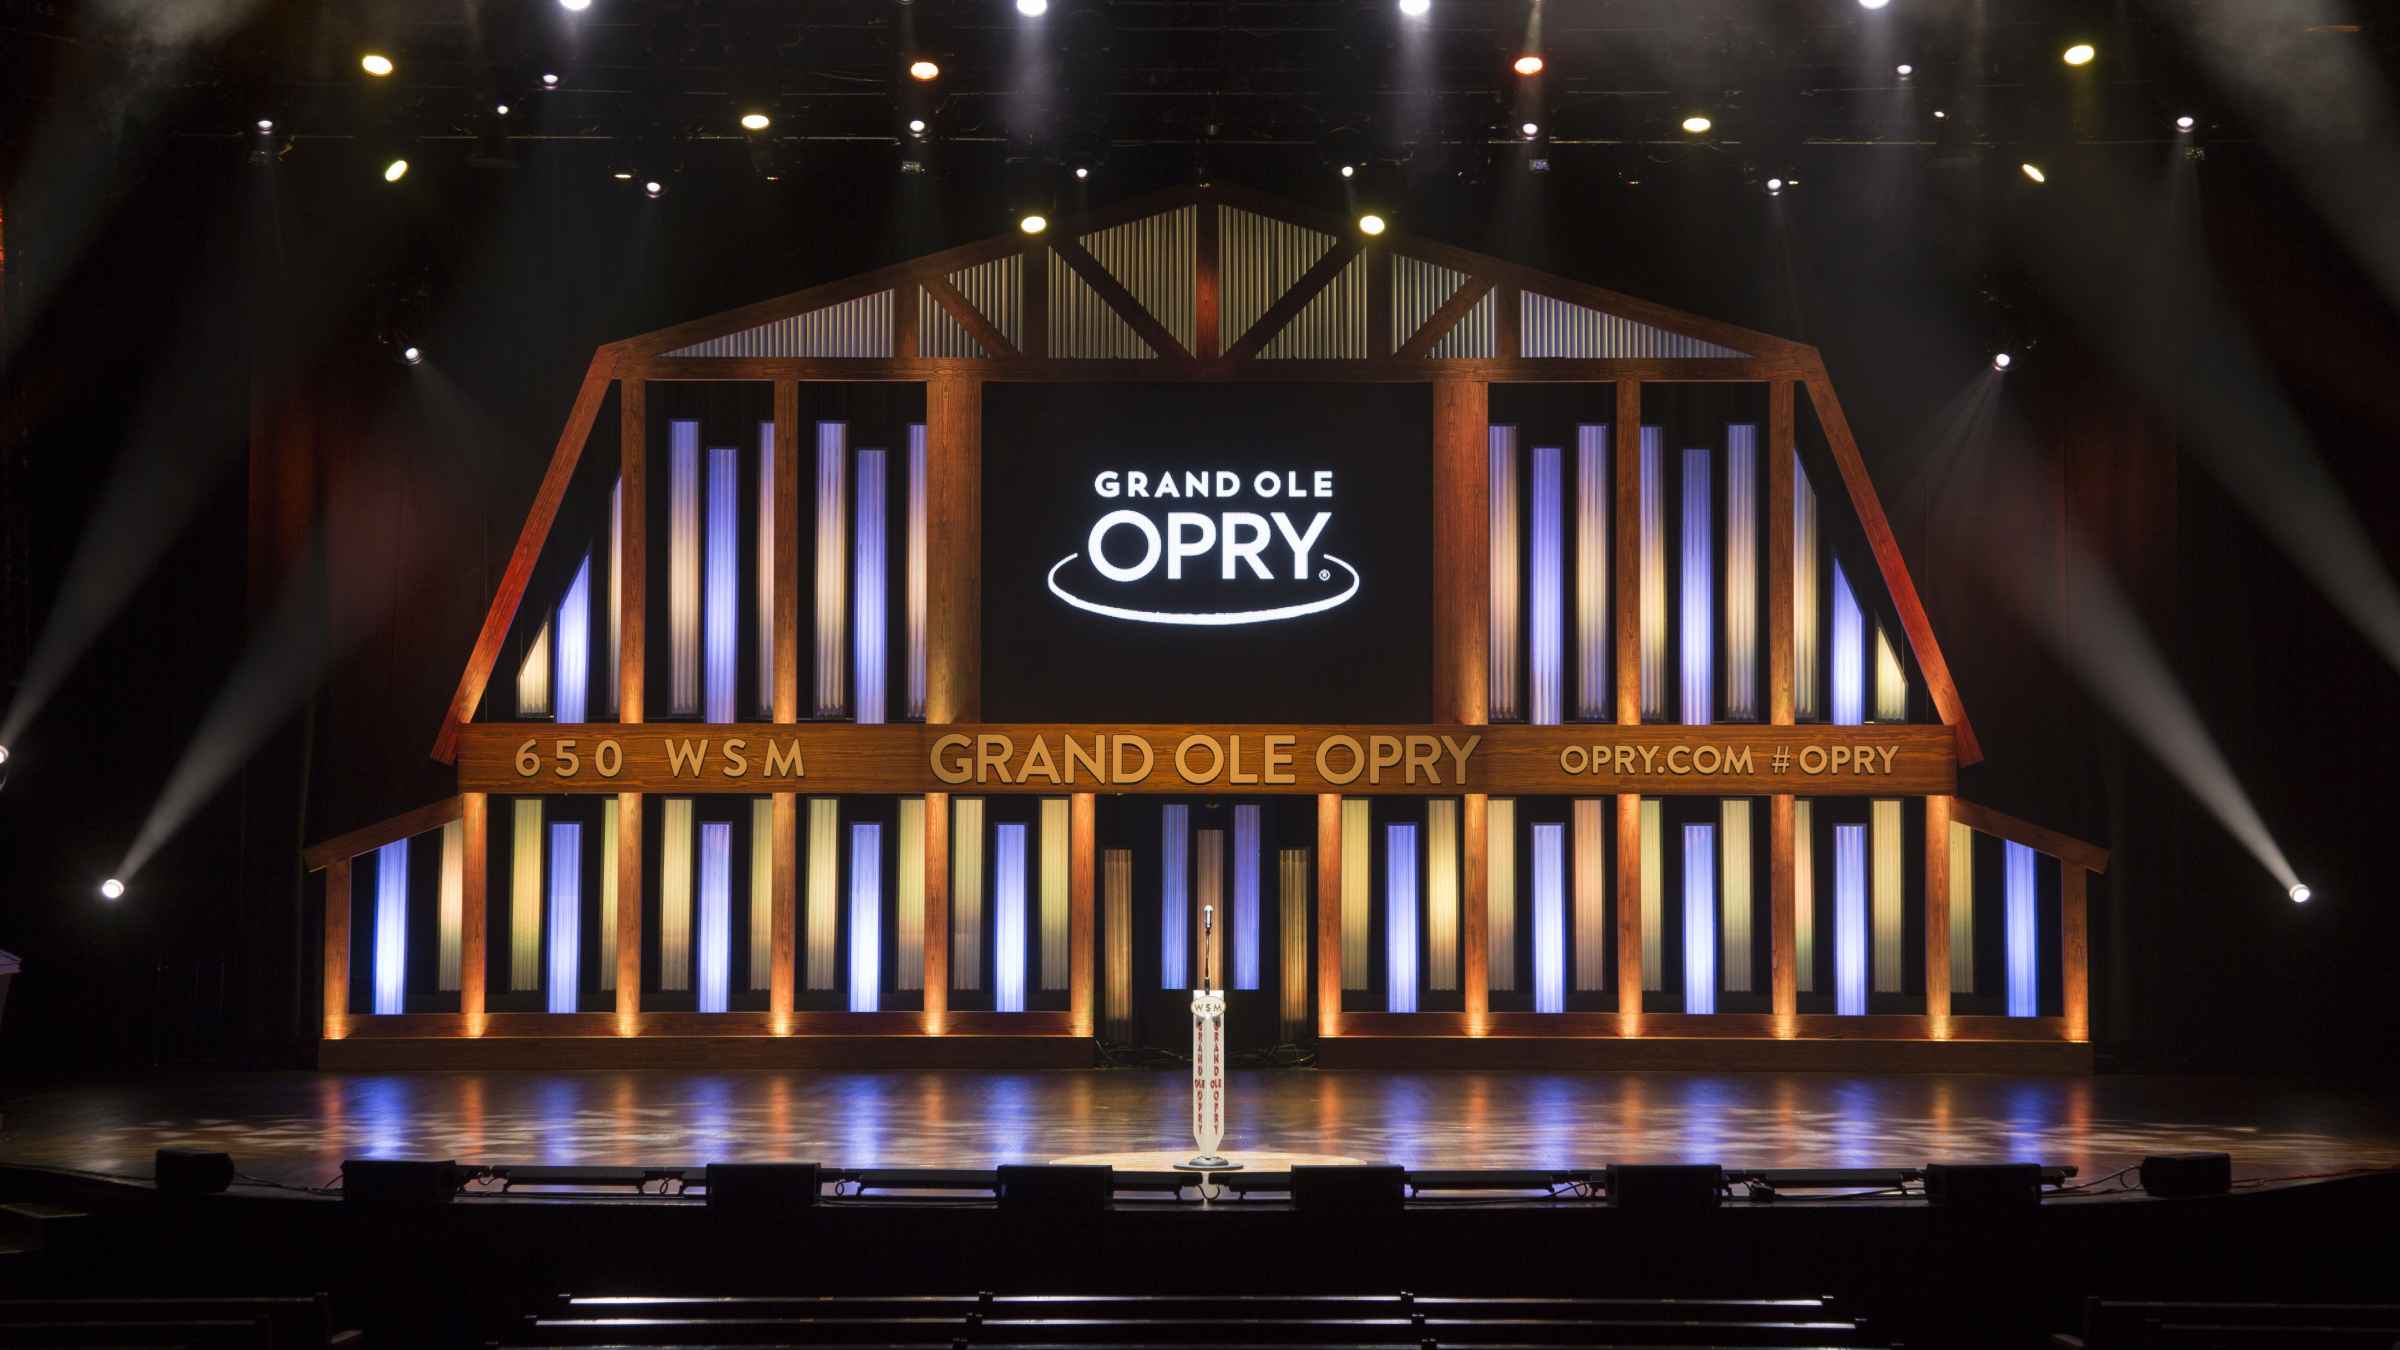 grand ole opry tour schedule